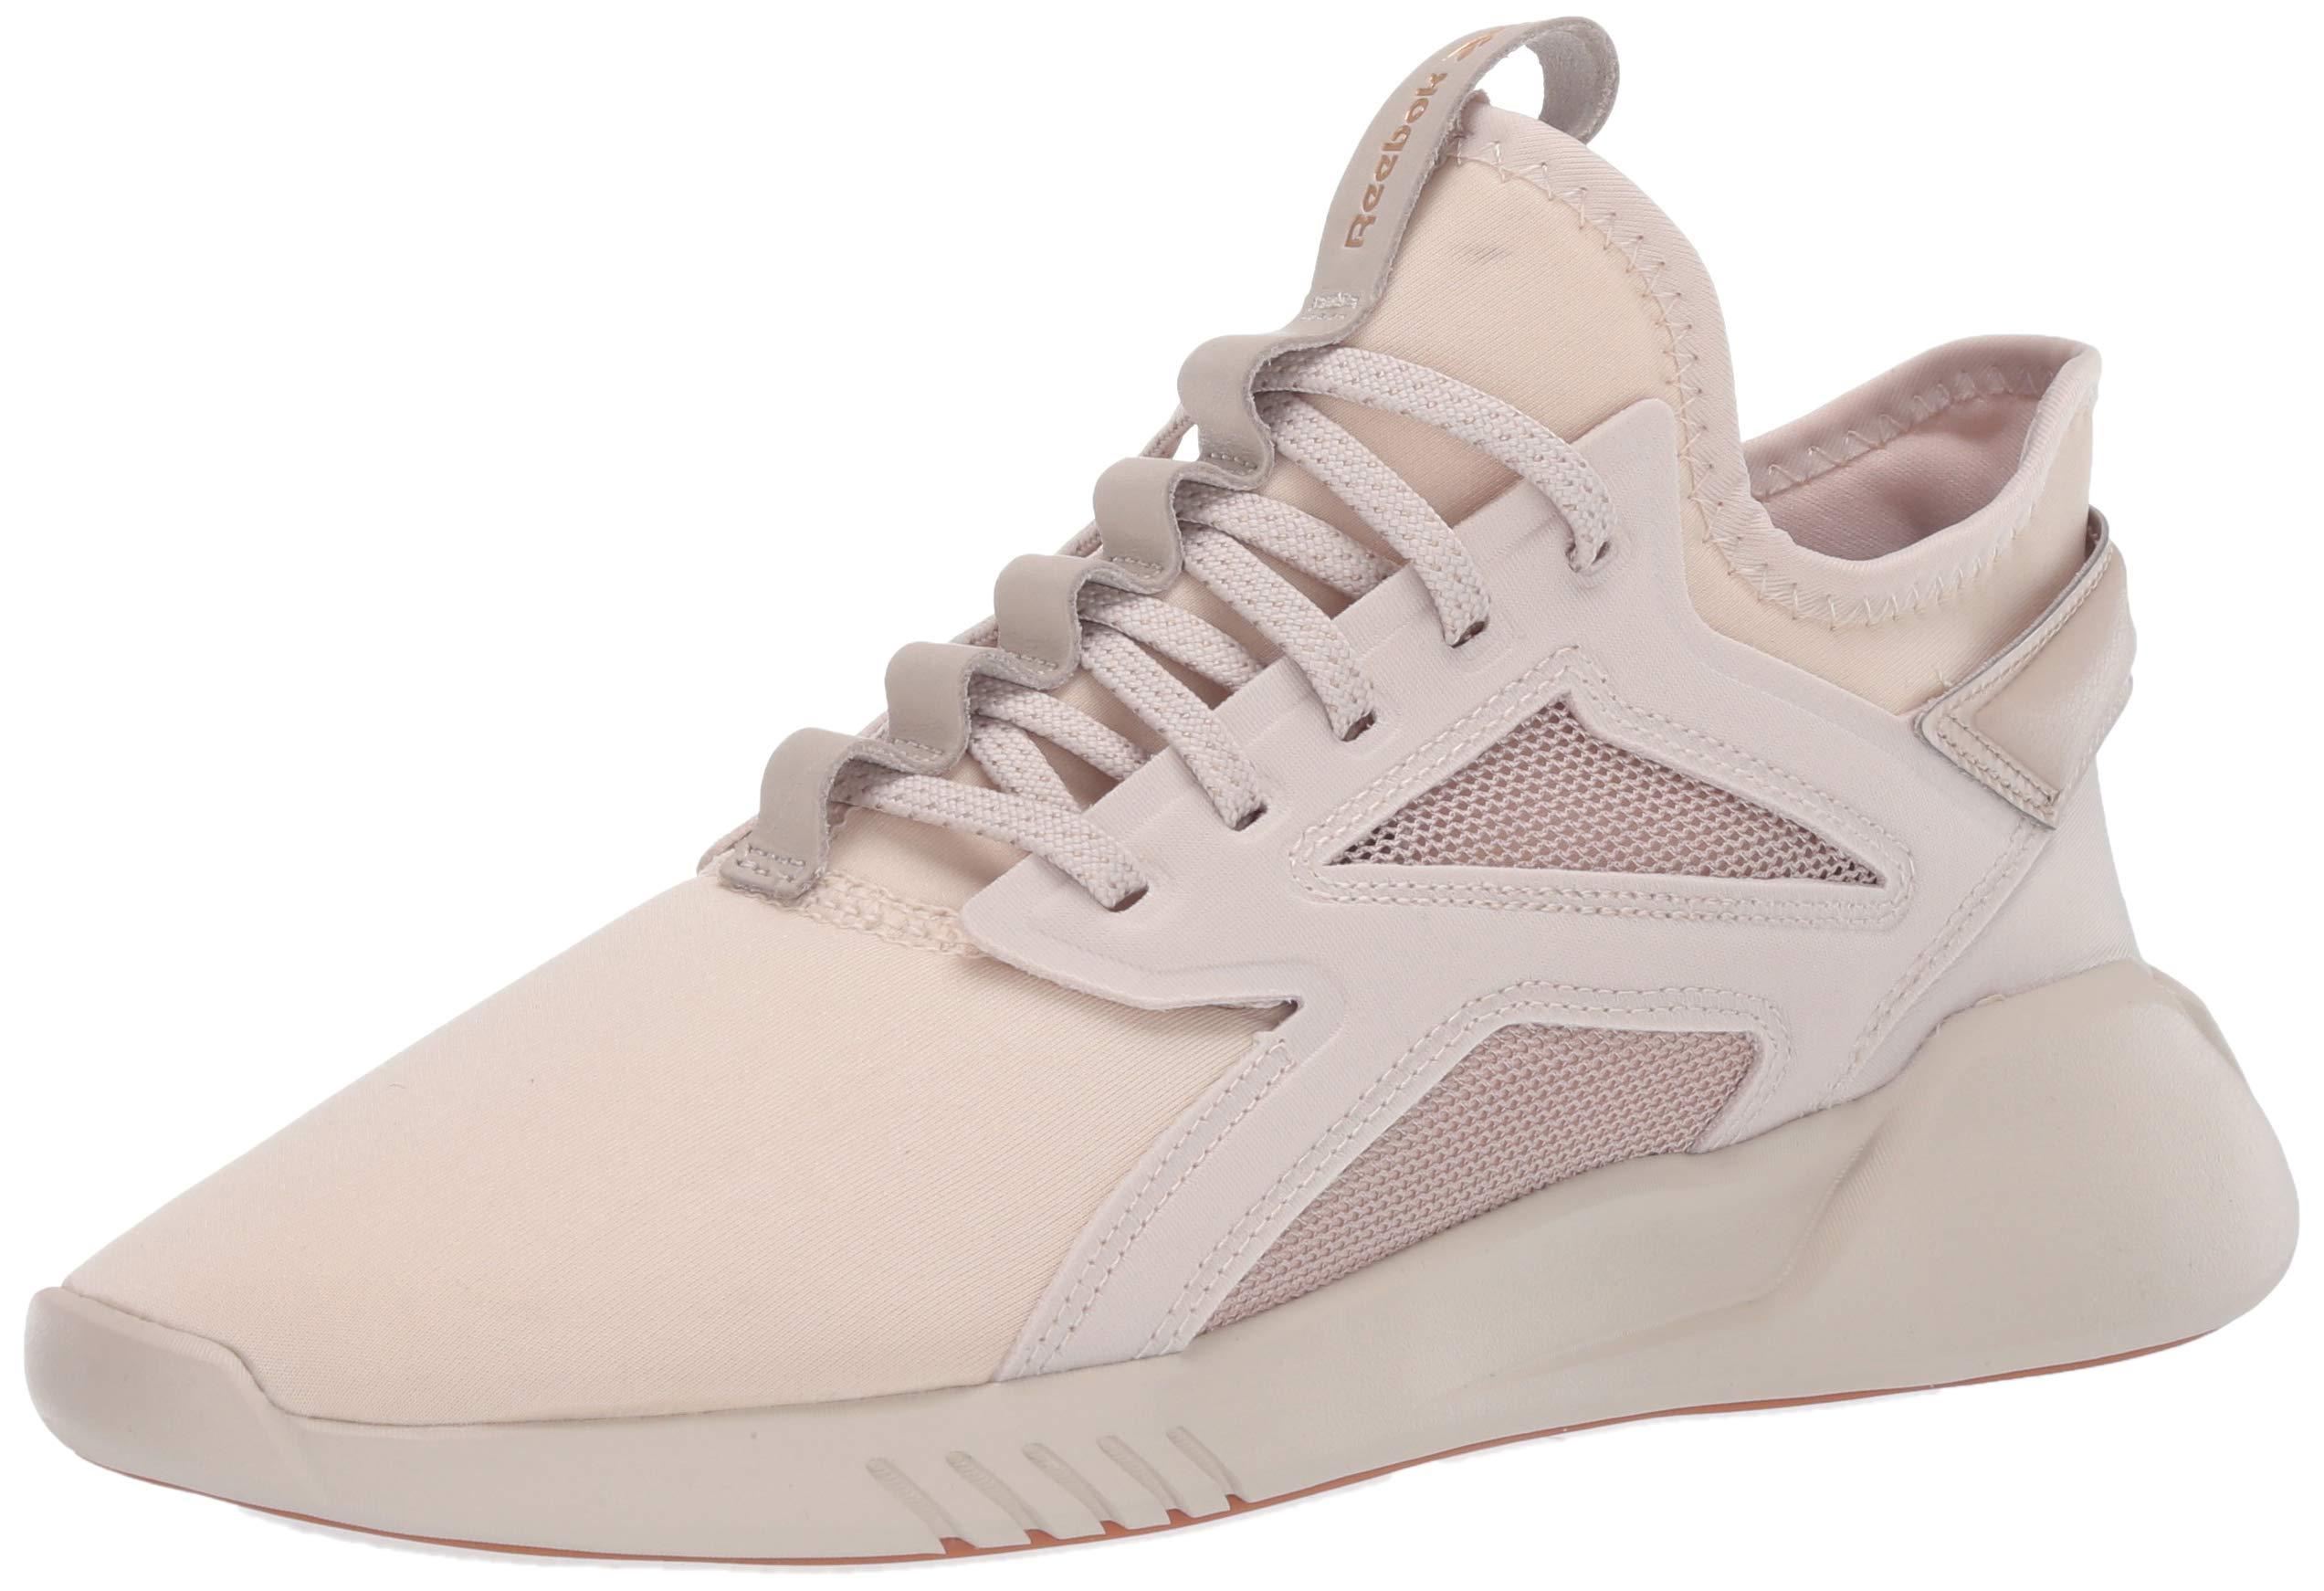 Reebok Freestyle Motion Dance Shoe in Natural